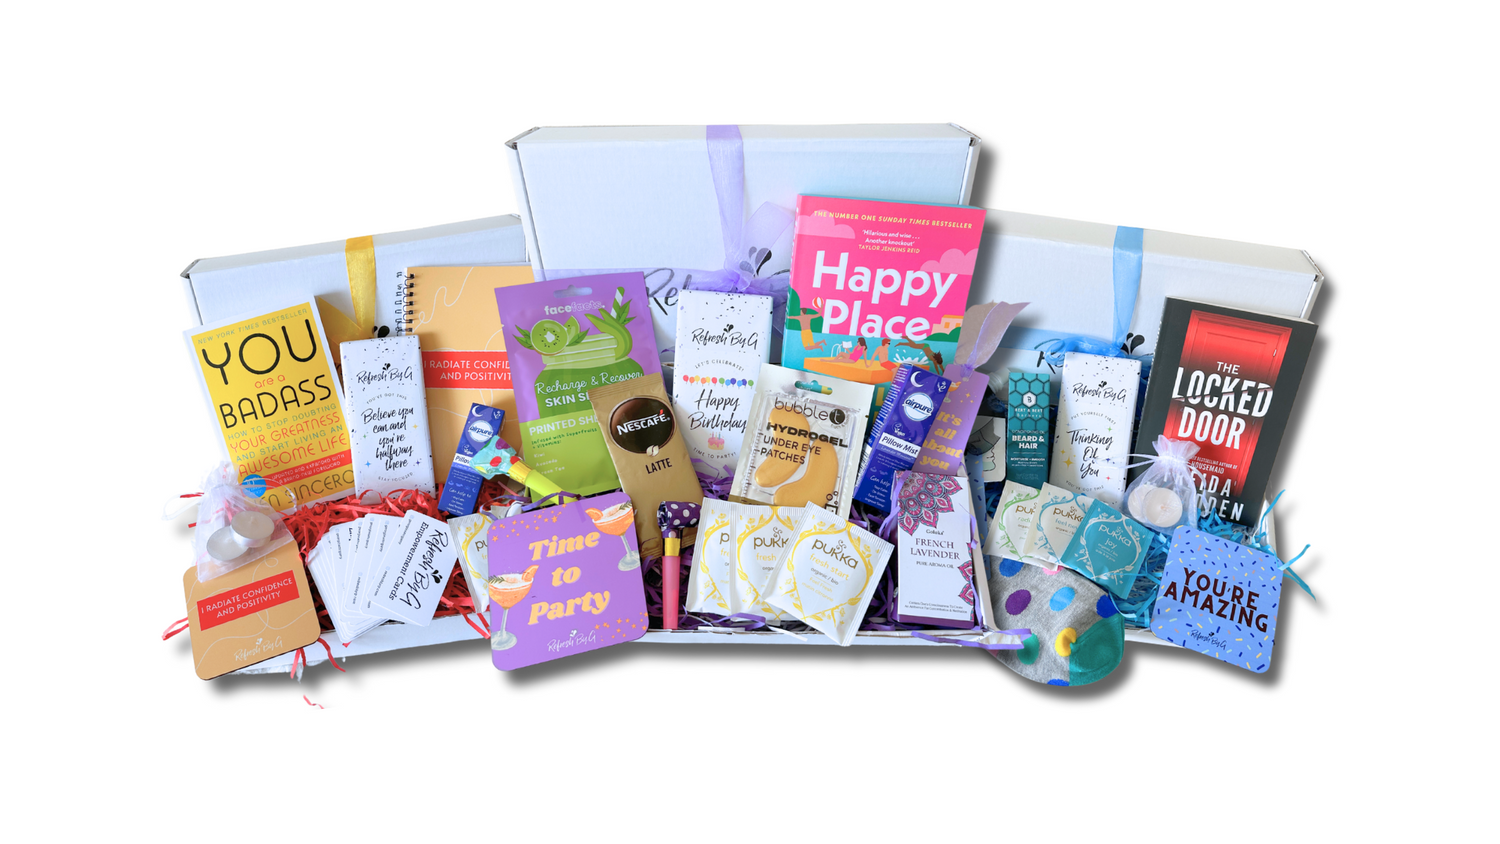 Confidence, birthday and thinking of you gift boxes with book